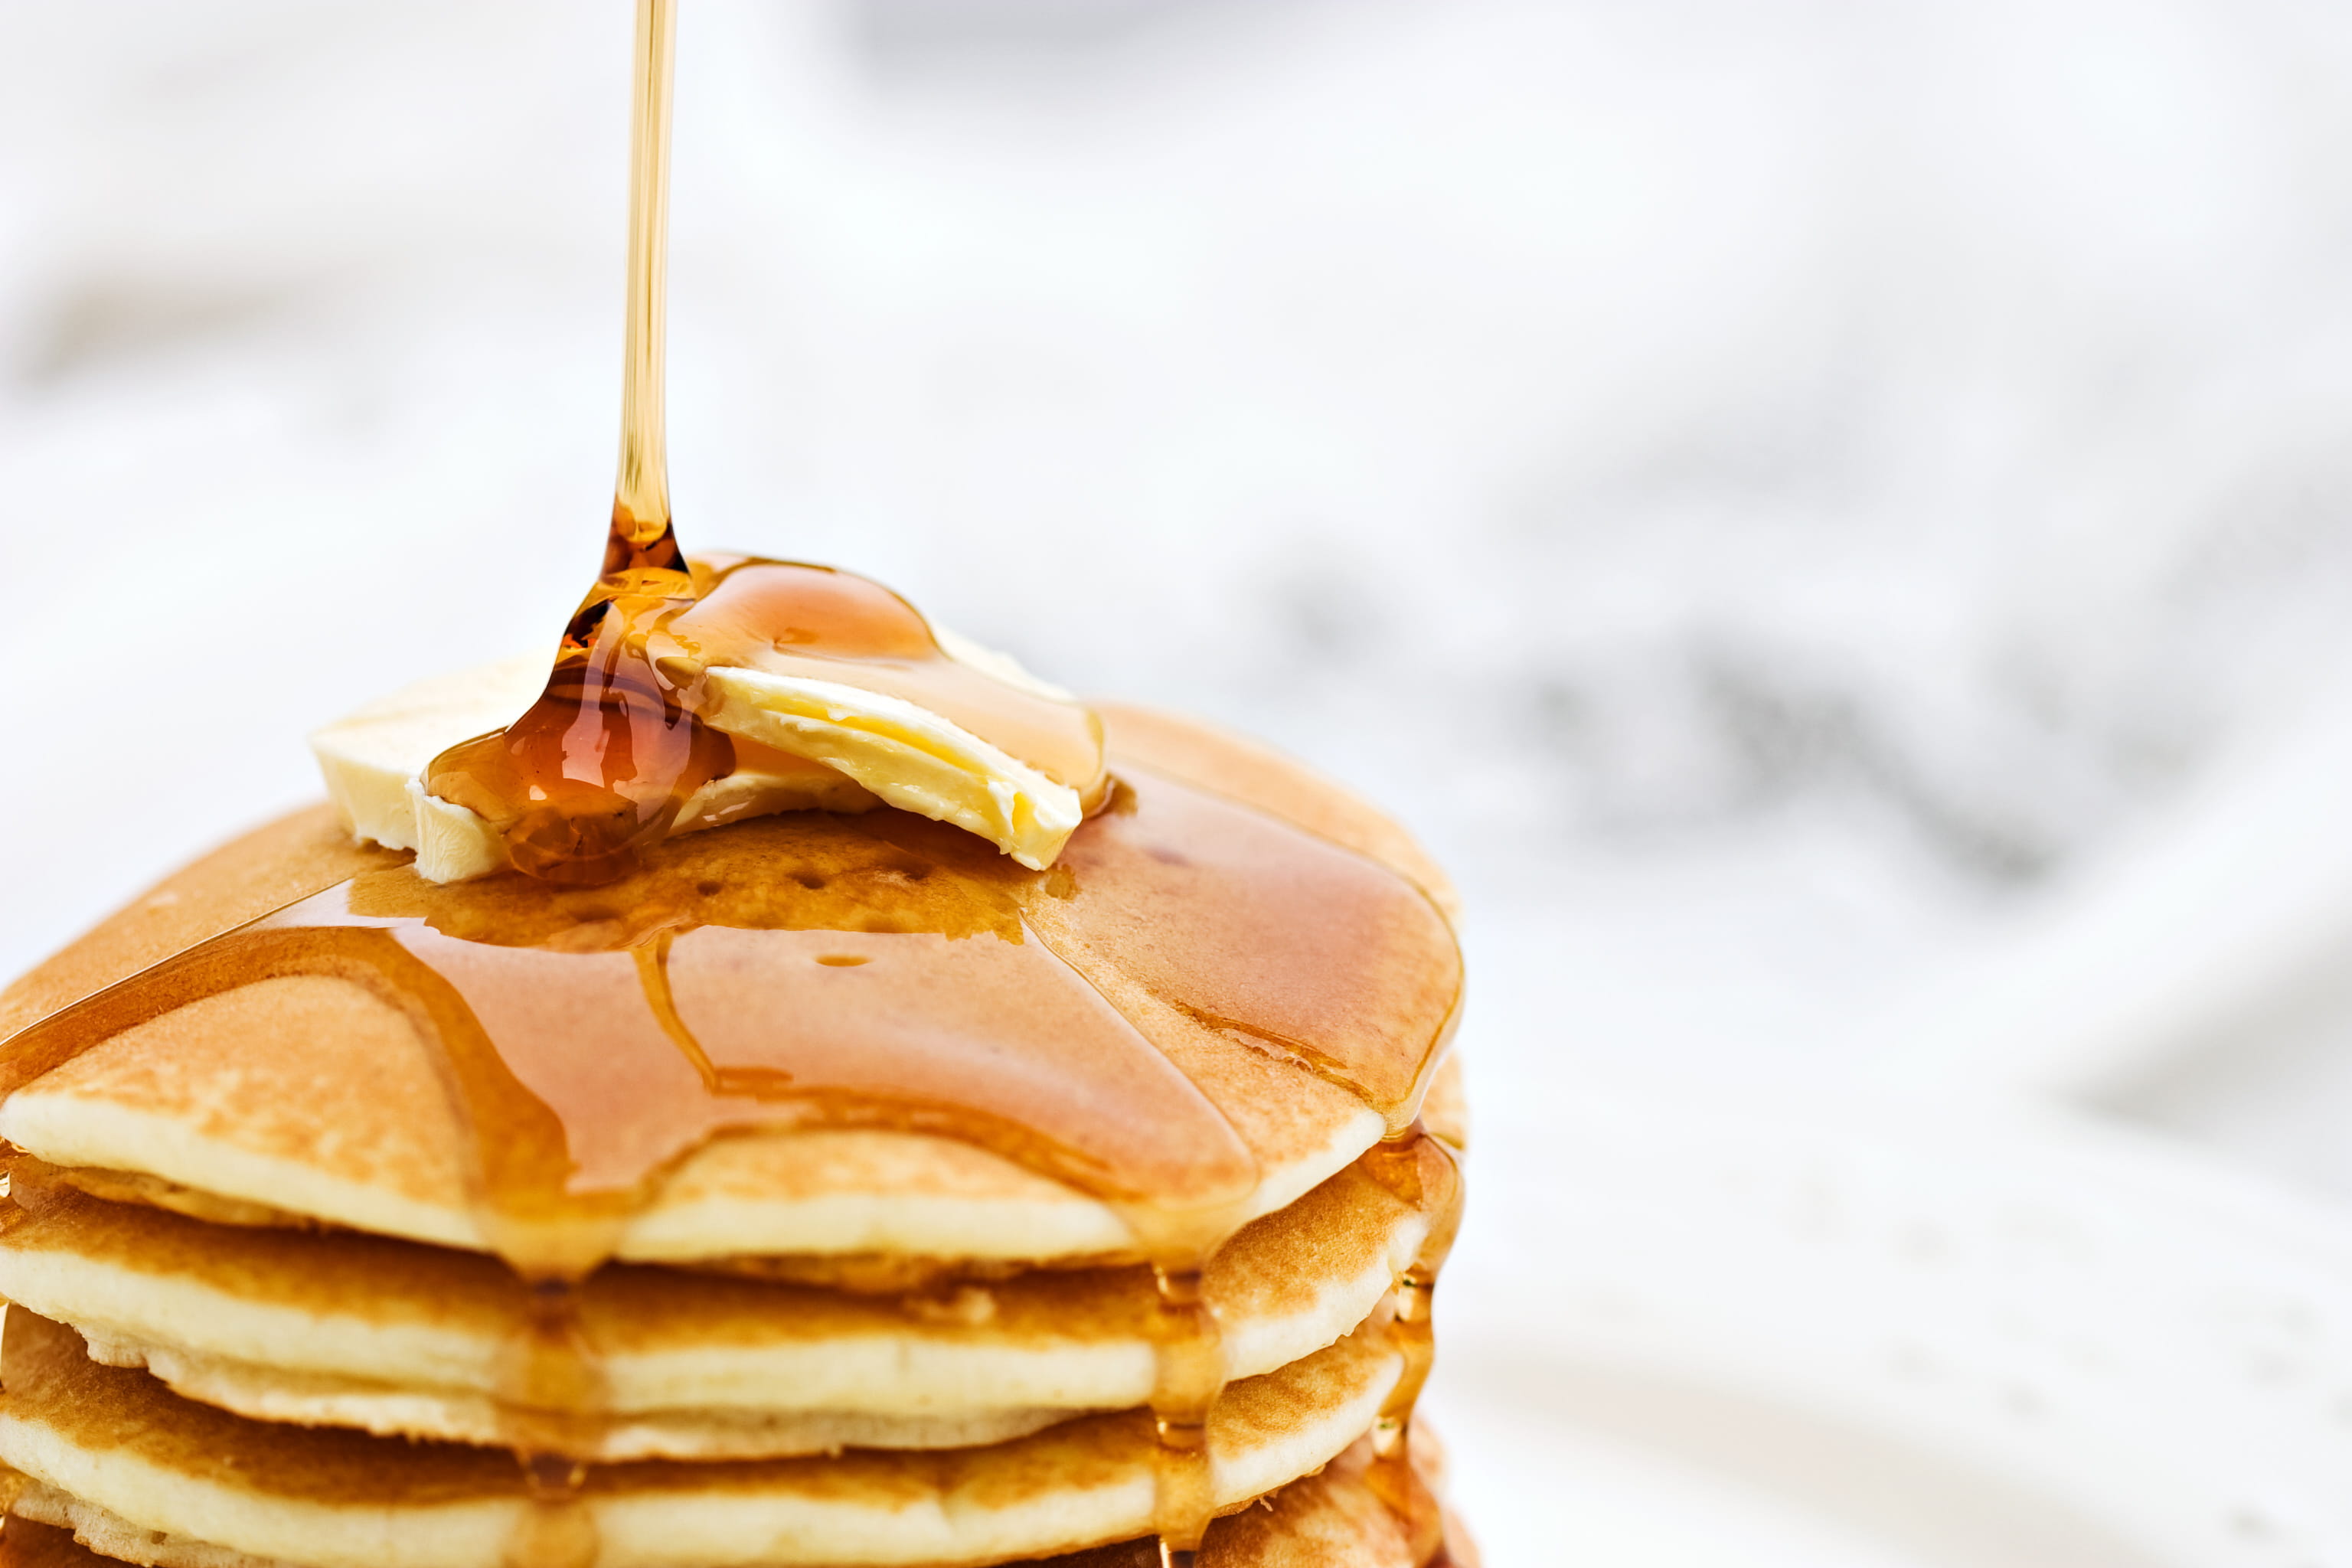 Pancake tower with syrup